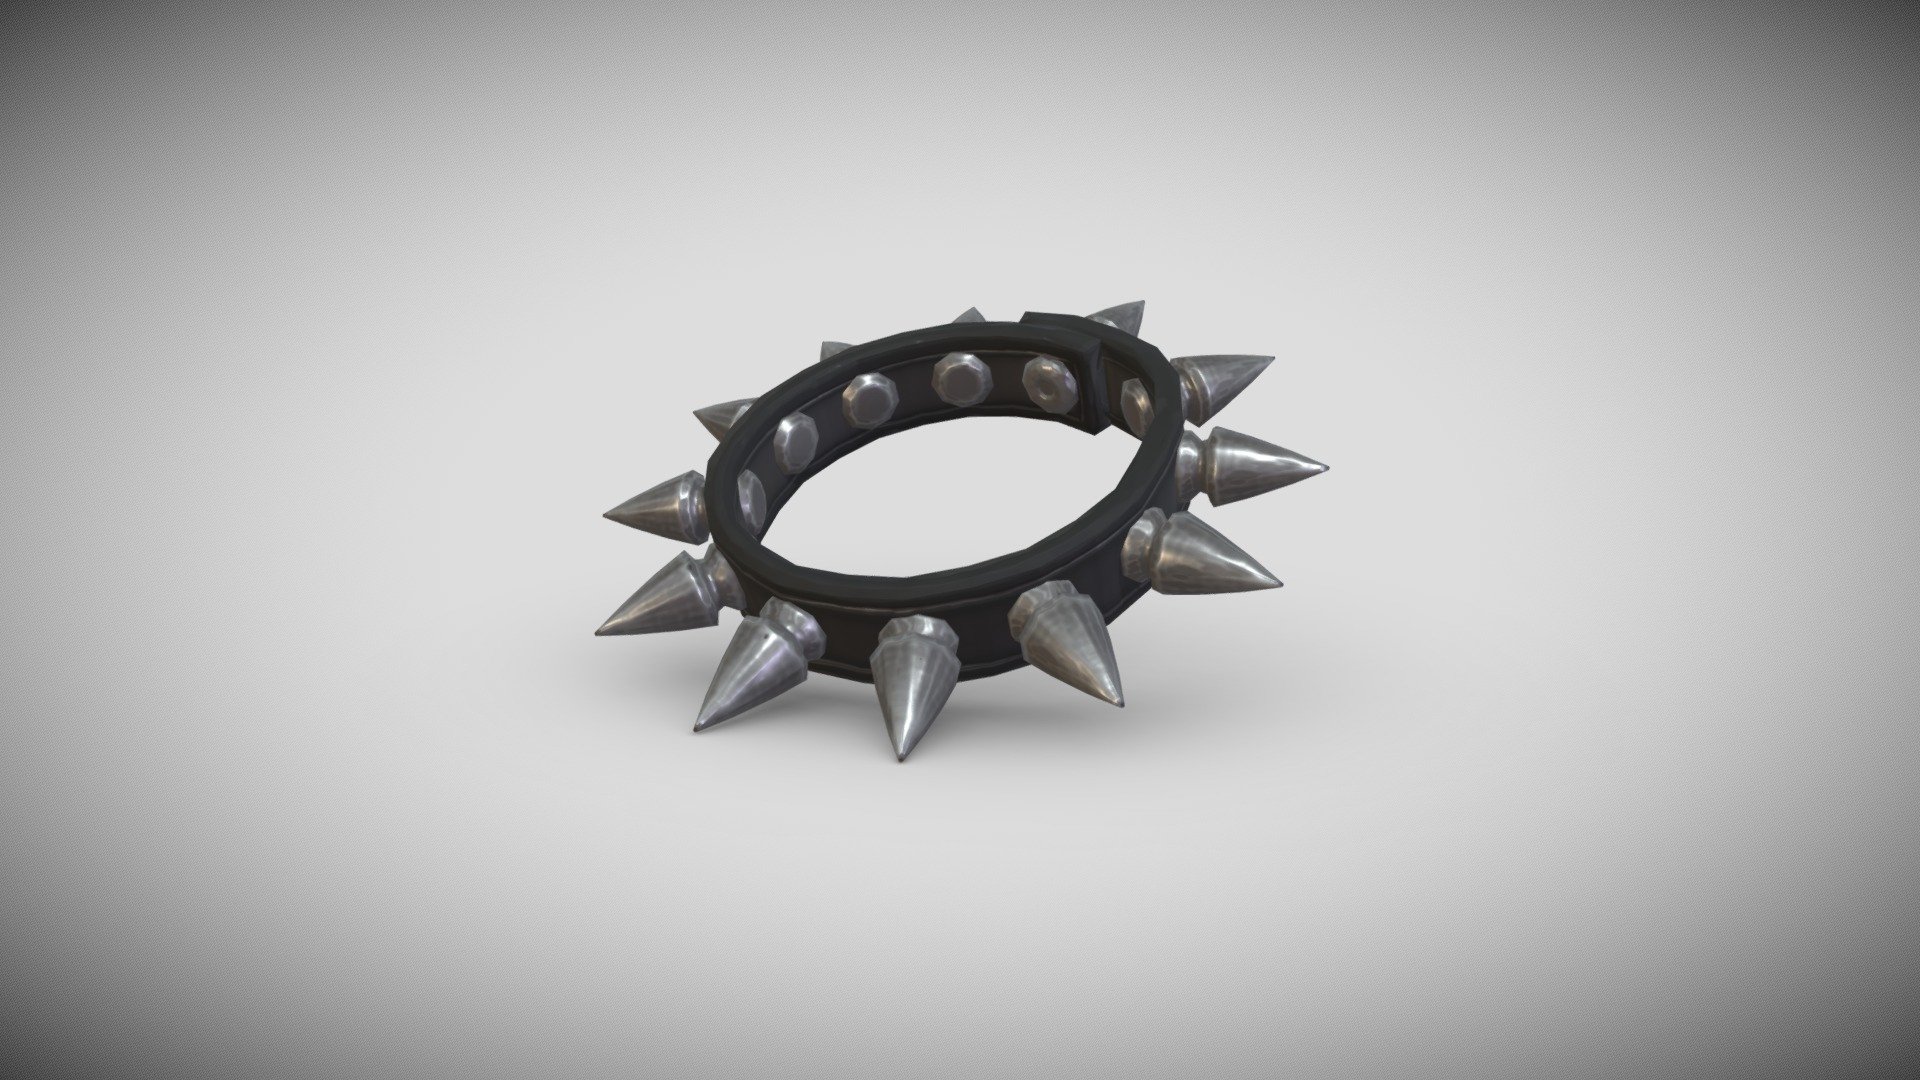 If you need additional work done do not hesitate to contact me, I am currently available for freelance work.

A spikey stylized collar for a punk character or to leash a pet dog/cat/etc. As punky choker for the player in a game with spikes that make it look more badass/goth/emo/etc.
Full retopology and pbr colored.

1233 Vertices

Highpoly sculpted in Nomadsculpt. Lowpoly made in Blender
Highpoly and Lowpoly-model are in a Blend-file included in additional file with embedded materials.
Model and Concept by Me, Enya Gerber 3d model